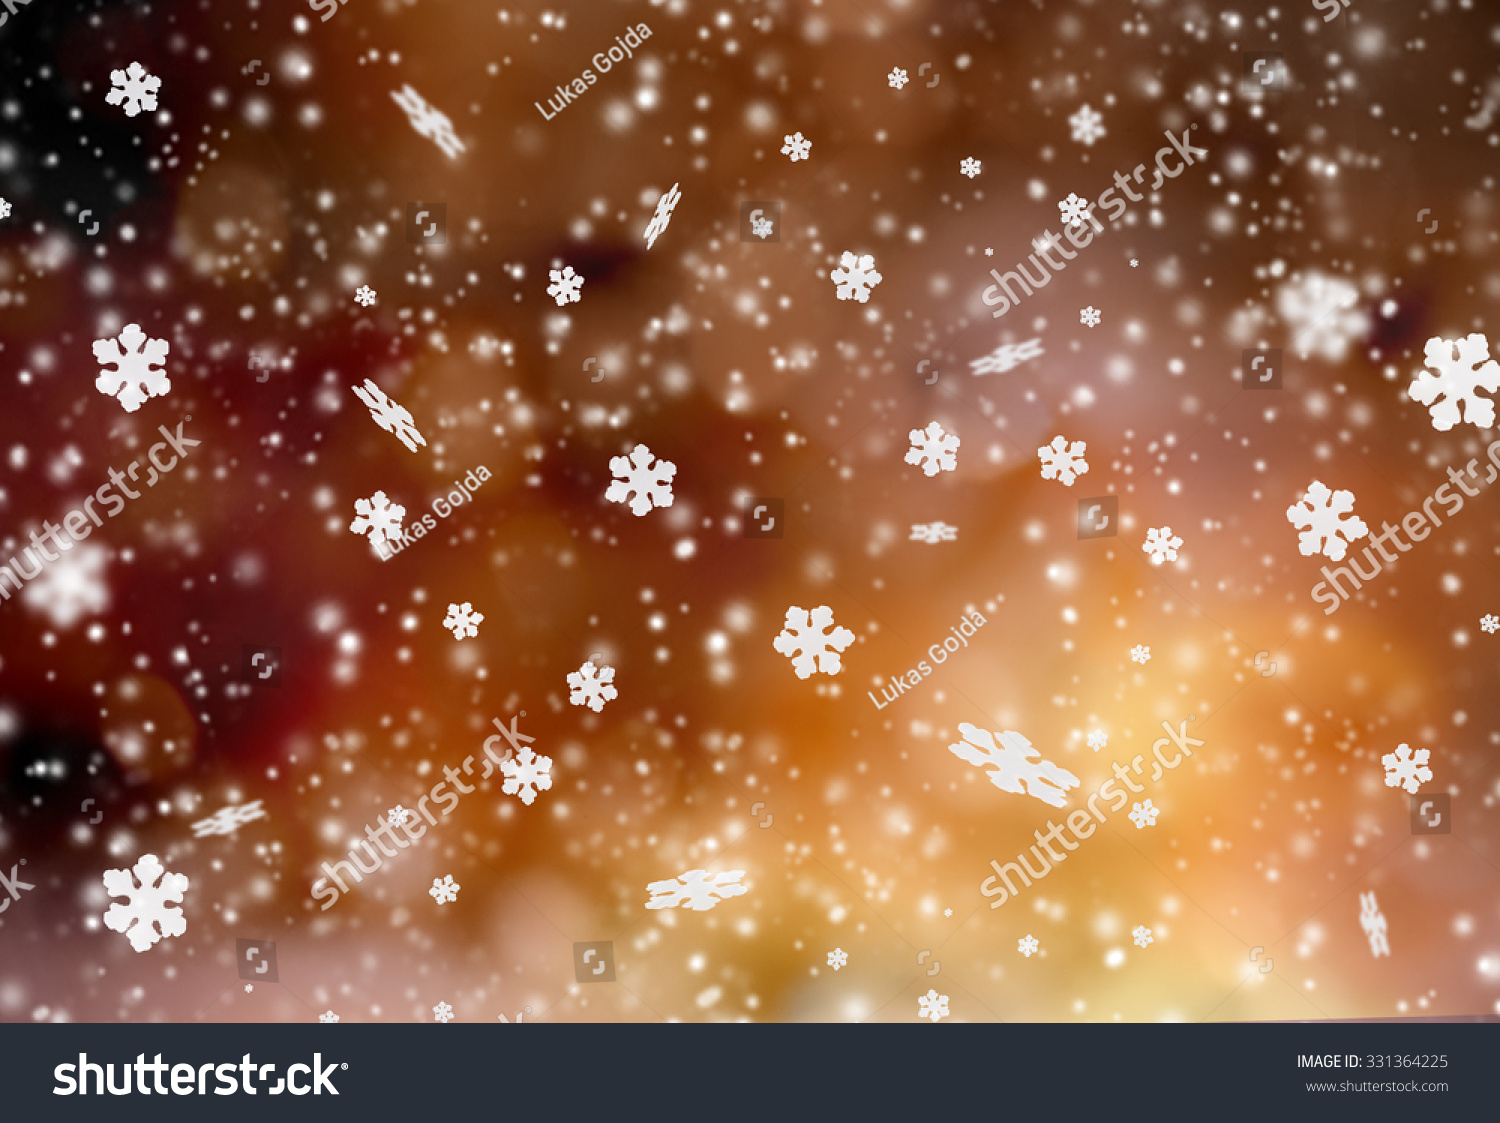 Abstract Christmas background #331364225